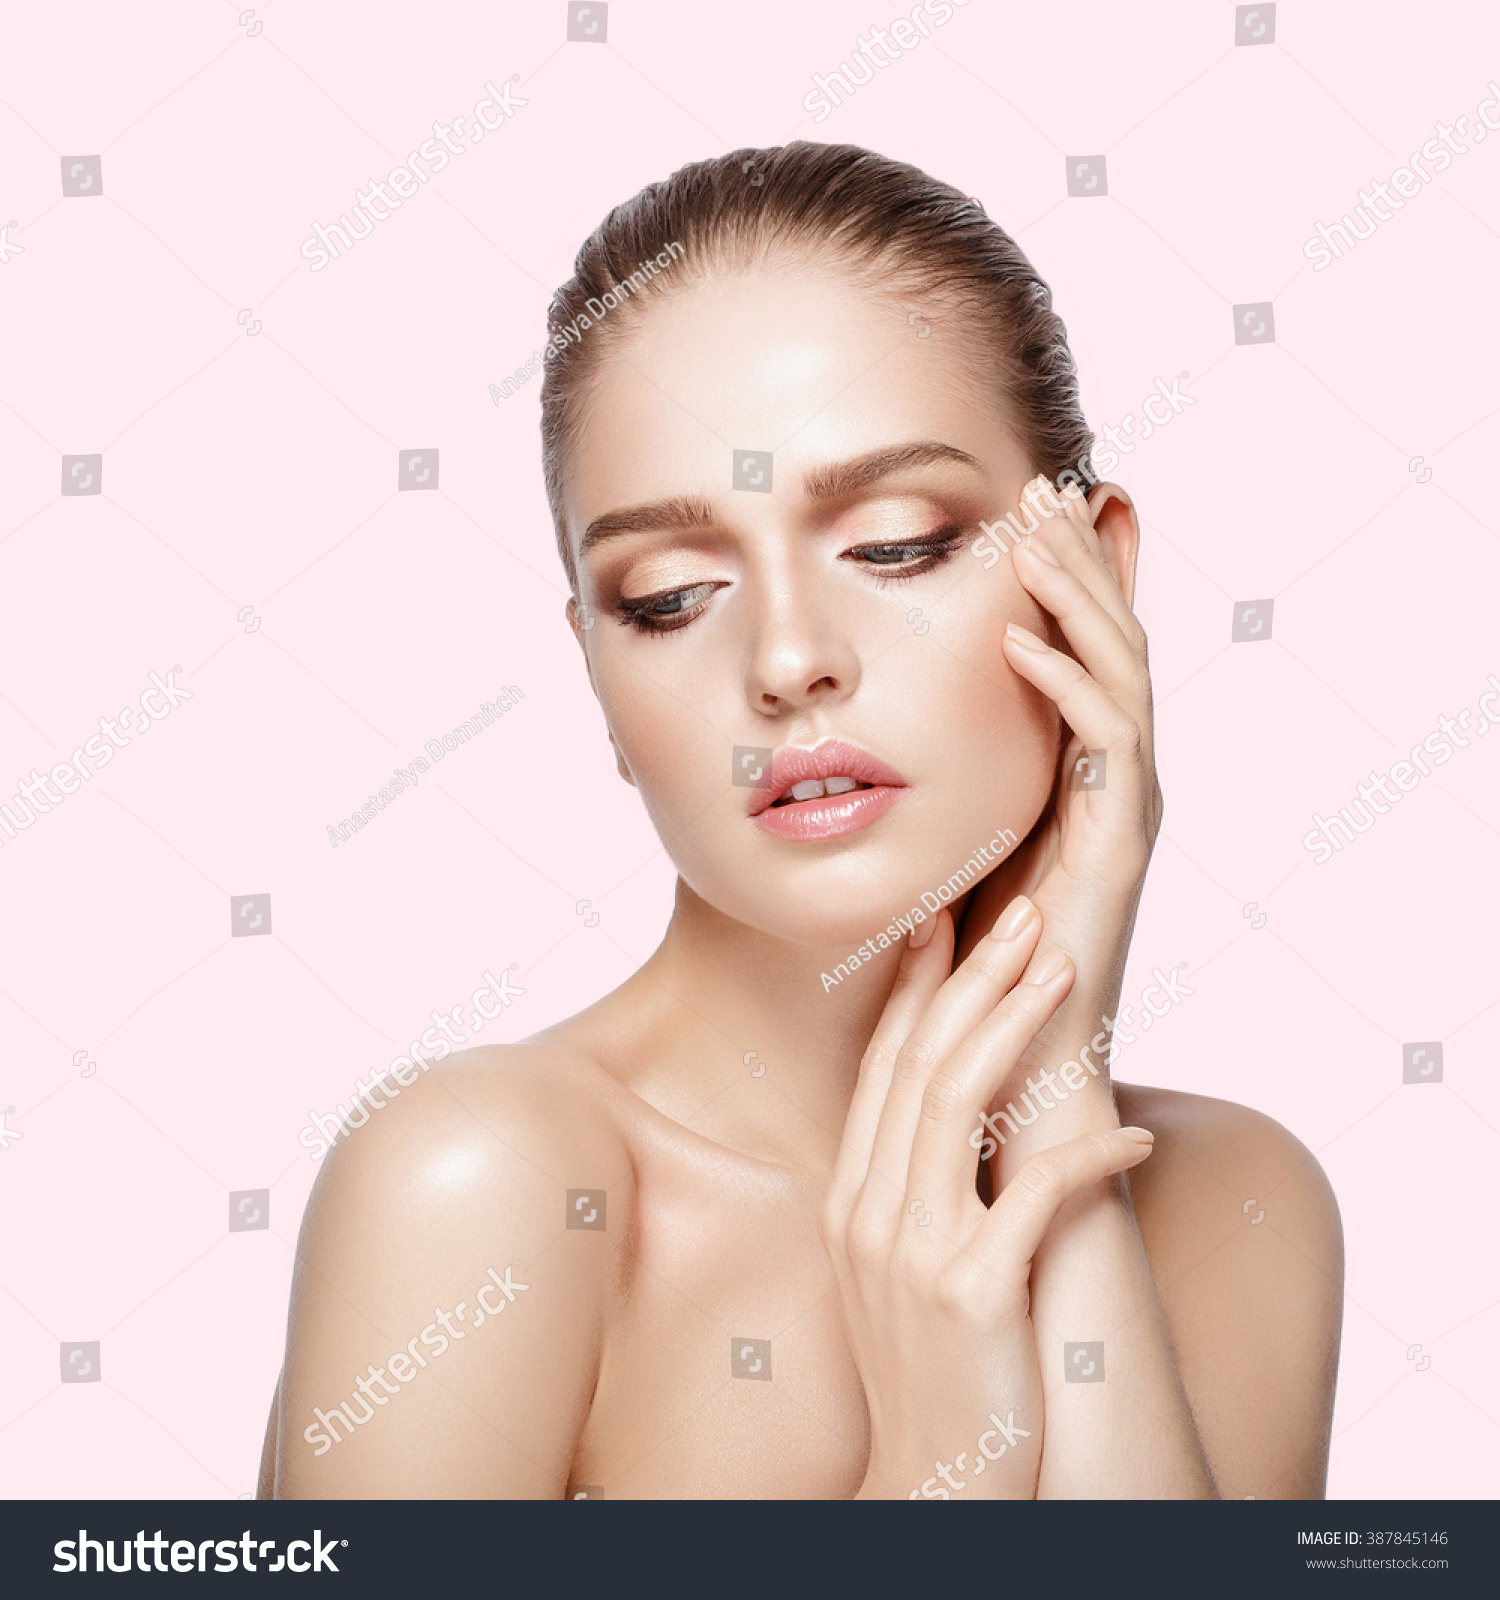 Studio portrait of young beautiful model with hands near her face on pink background. Perfect fresh clean skin. professional makeup. Brunette hair. Hands touching her face. Not isolated #387845146